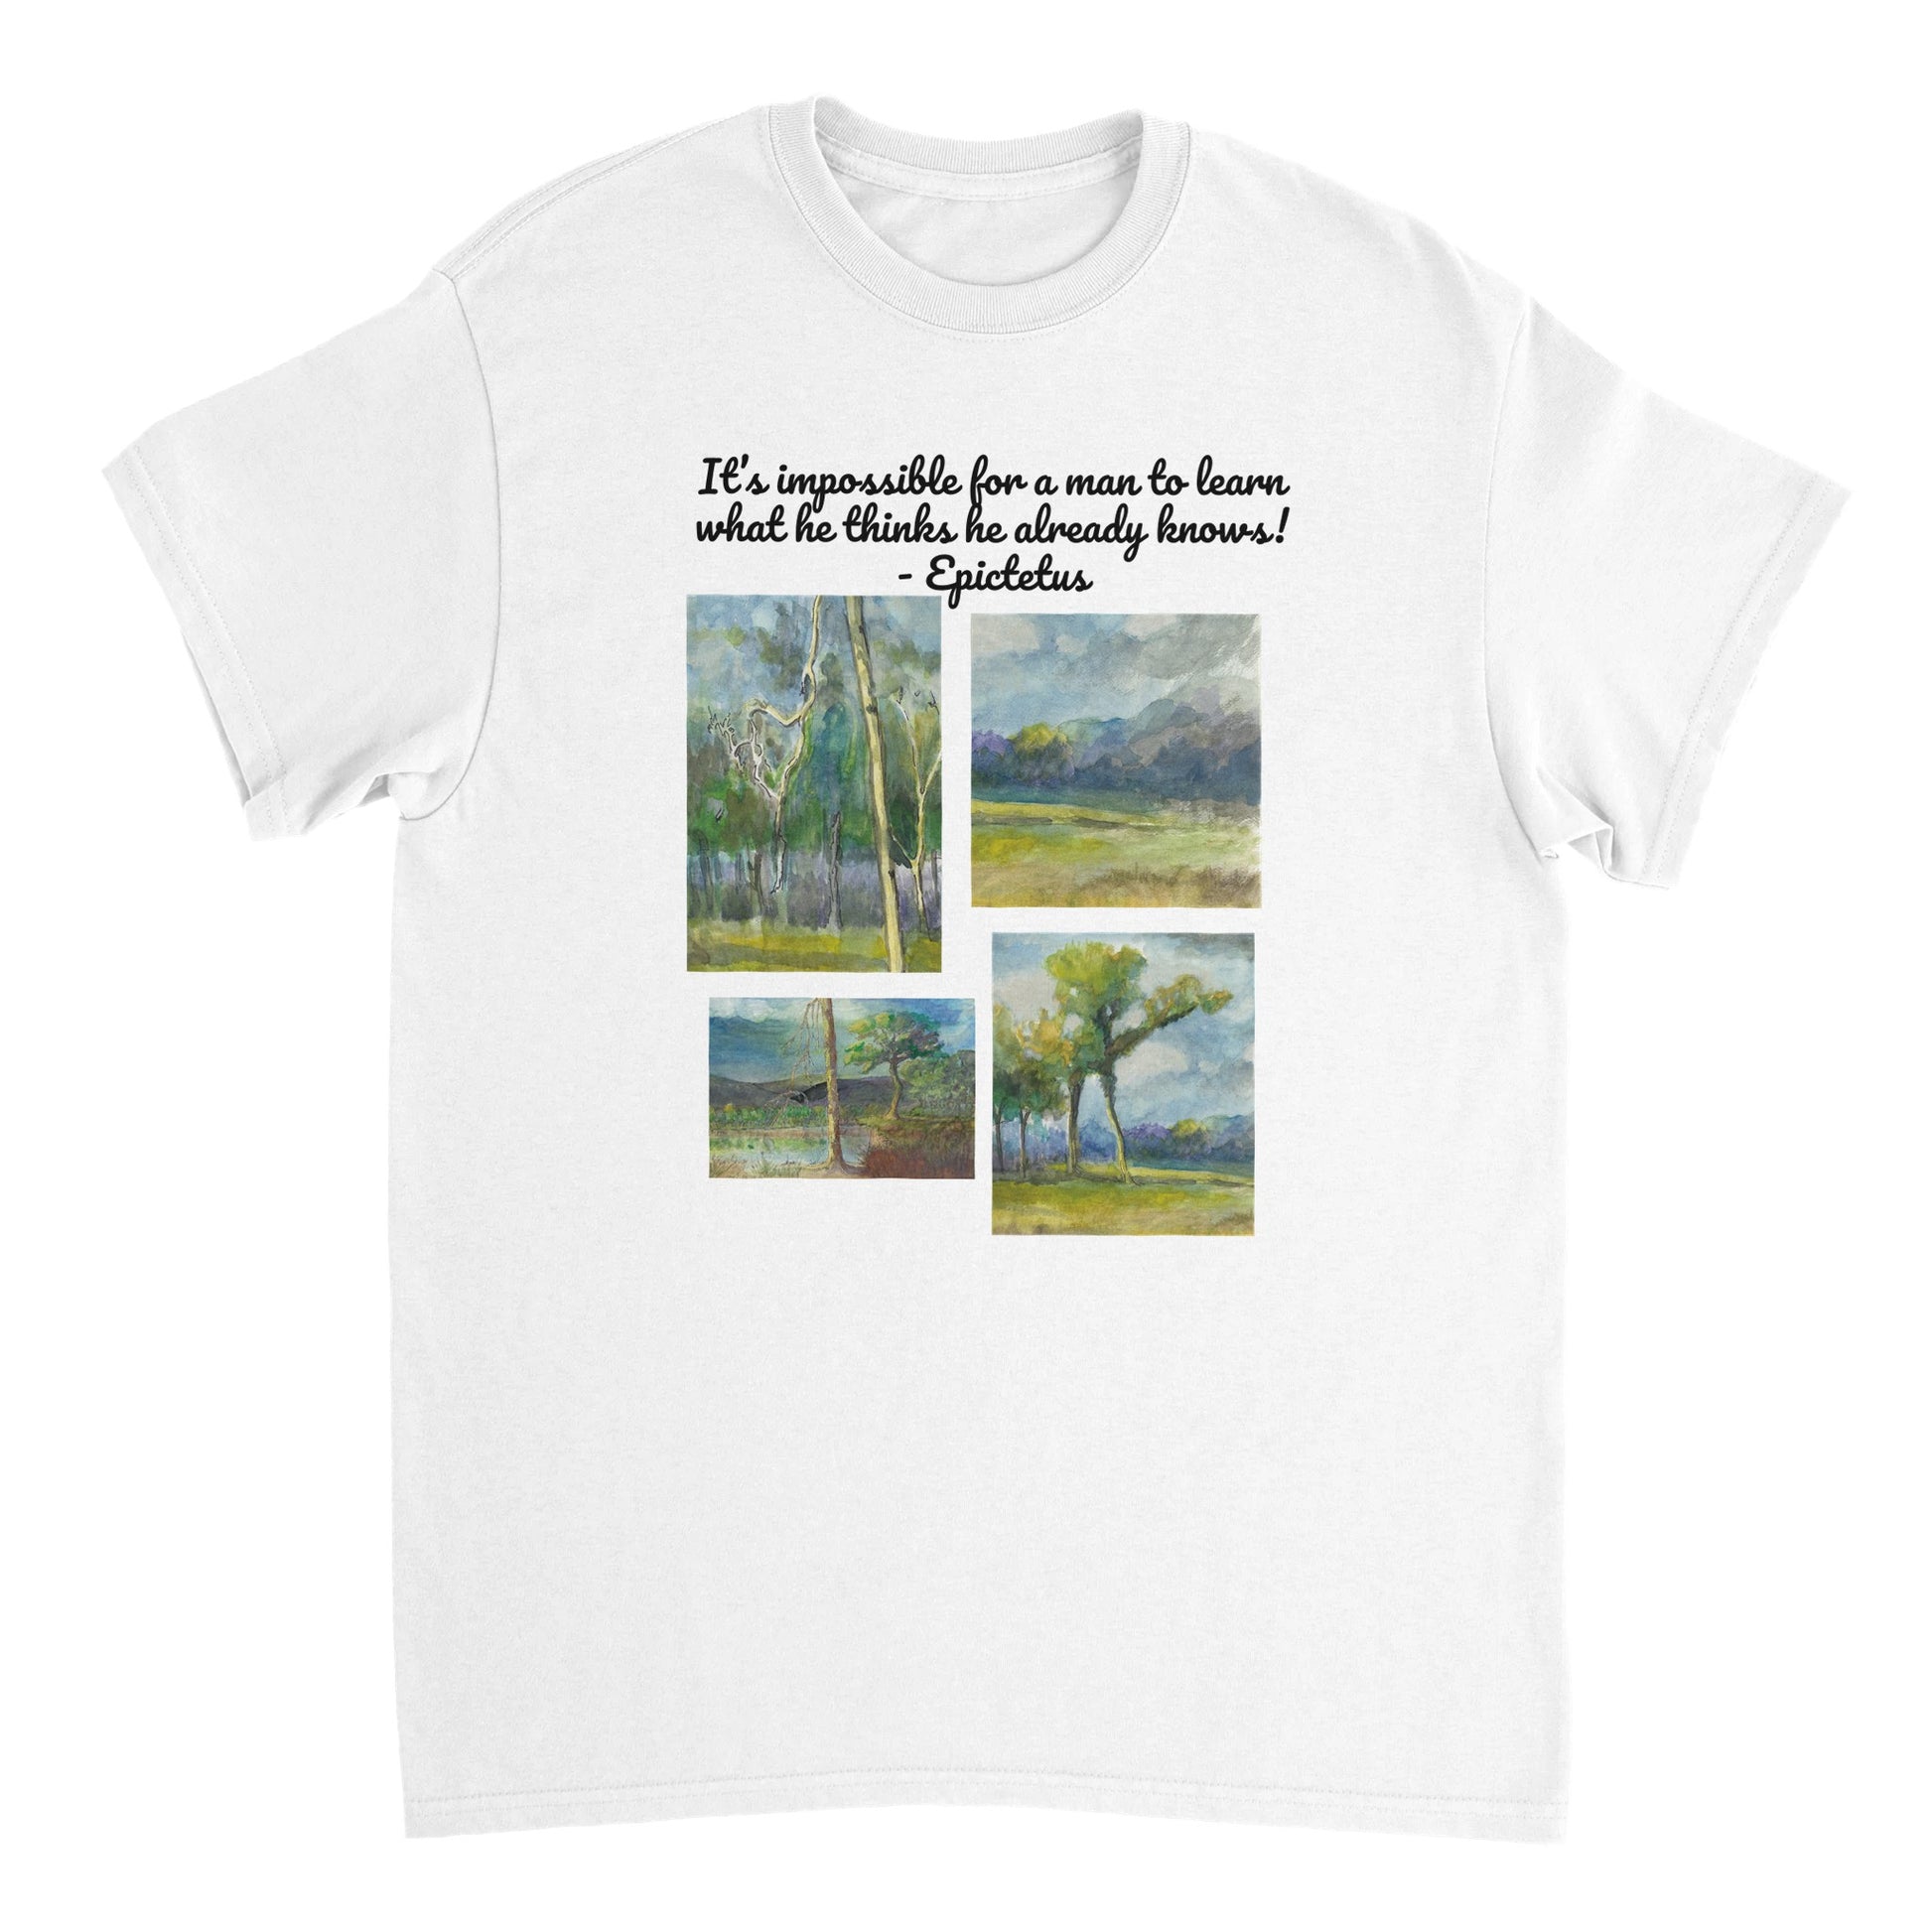 A white heavyweight Unisex Crewneck cotton t-shirt with original artwork It’s impossible for a man to learn what he thinks he already knows! on the front from WhatYa Say Apparel lying flat. 